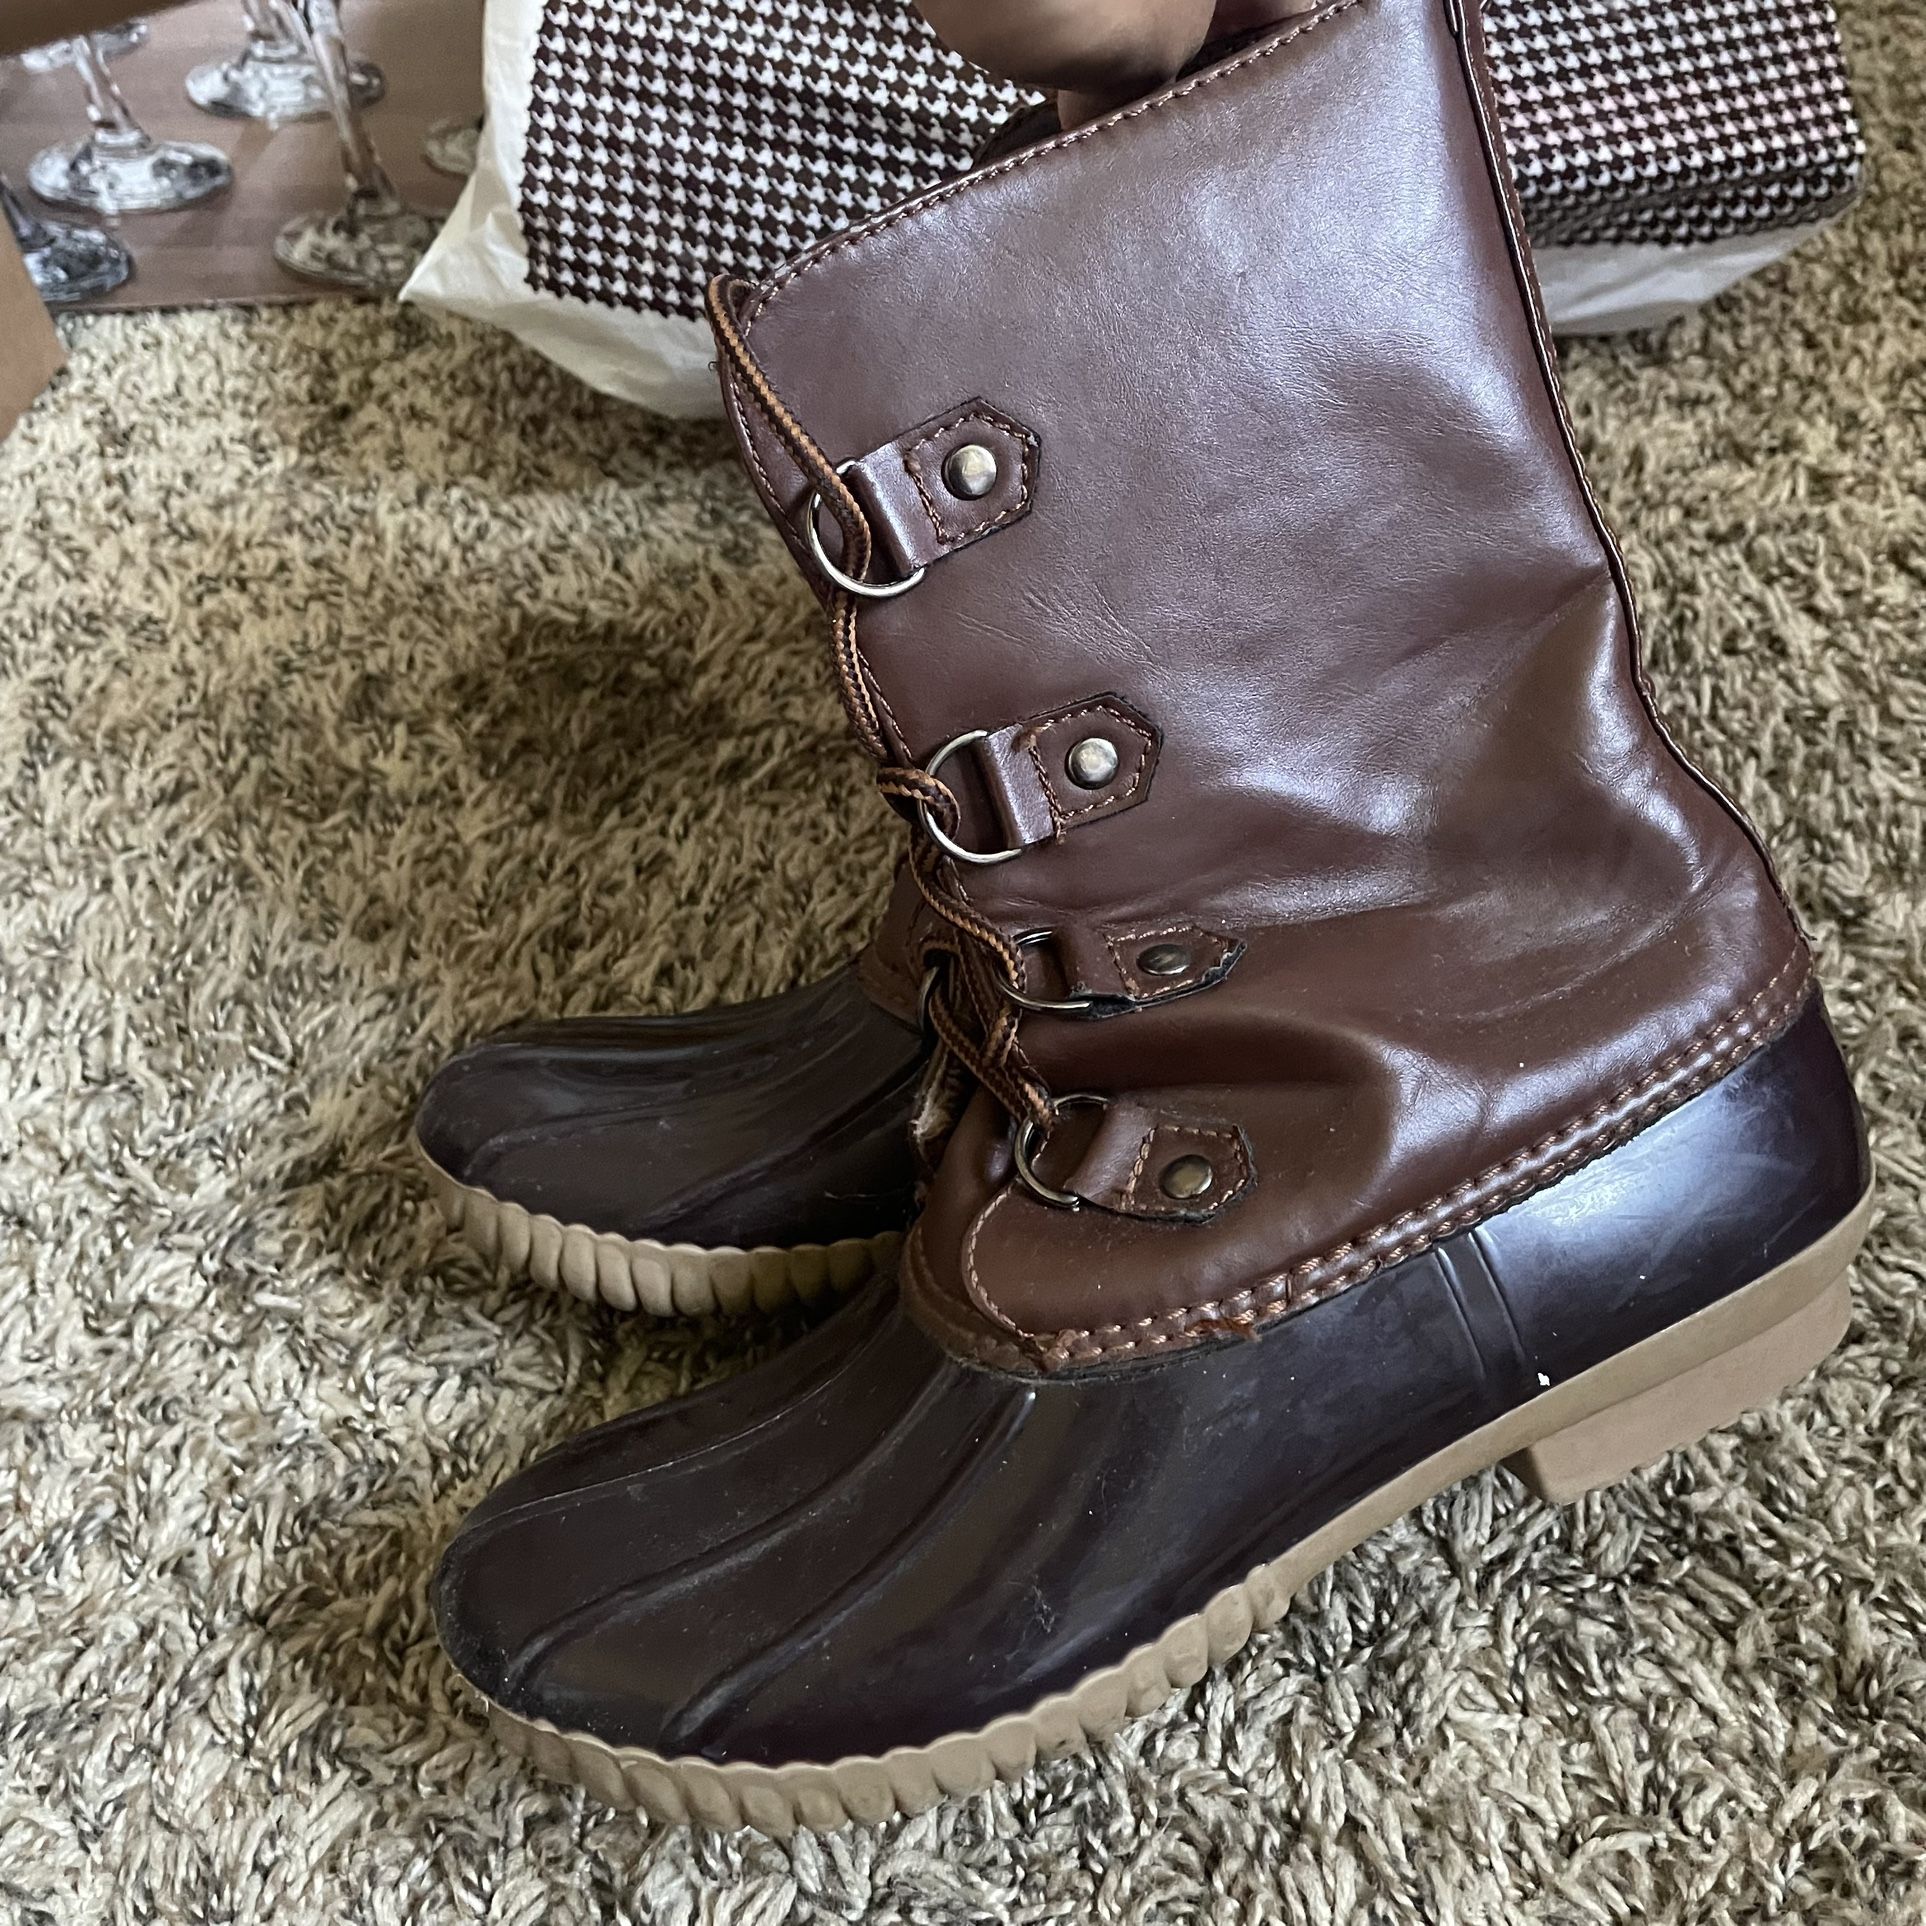 Woman’s Size 6 Rubber Boots